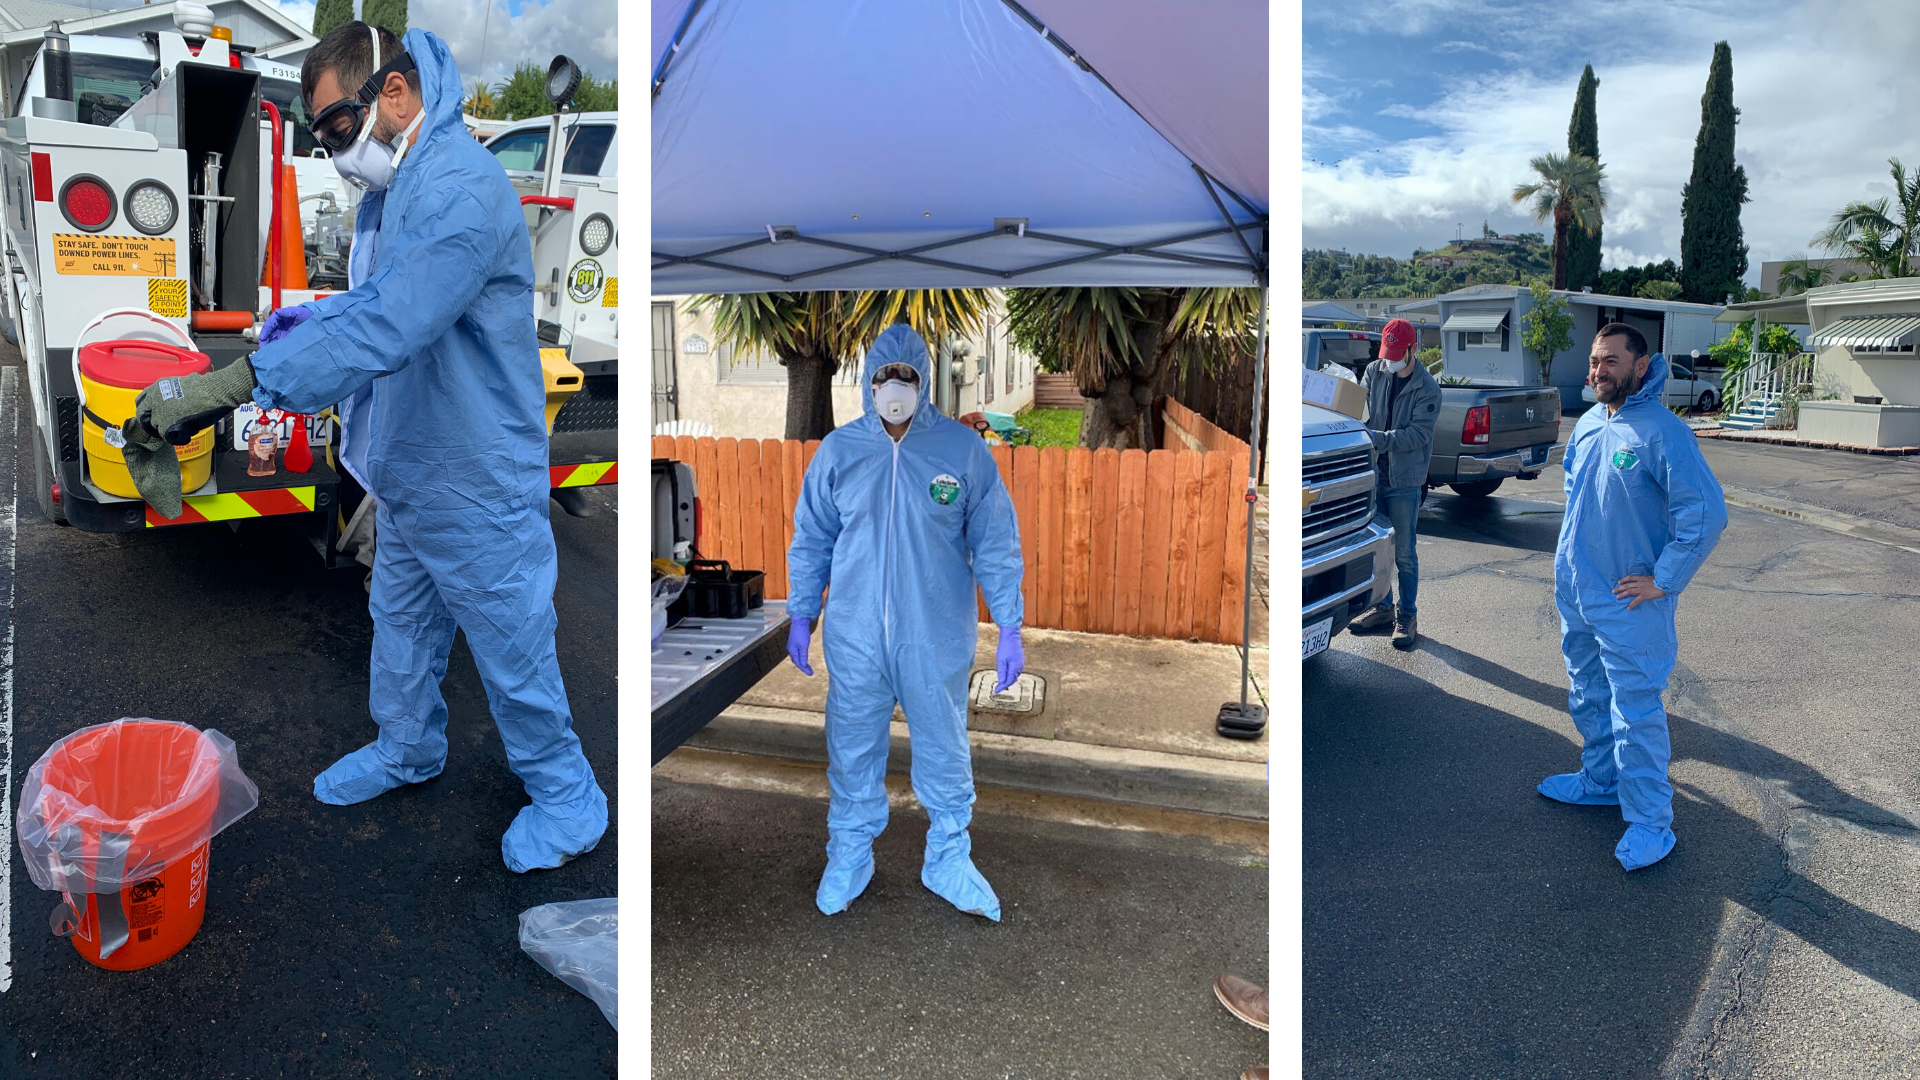 SDG&E employees wear personal protective equipment during COVID-19 crisis.